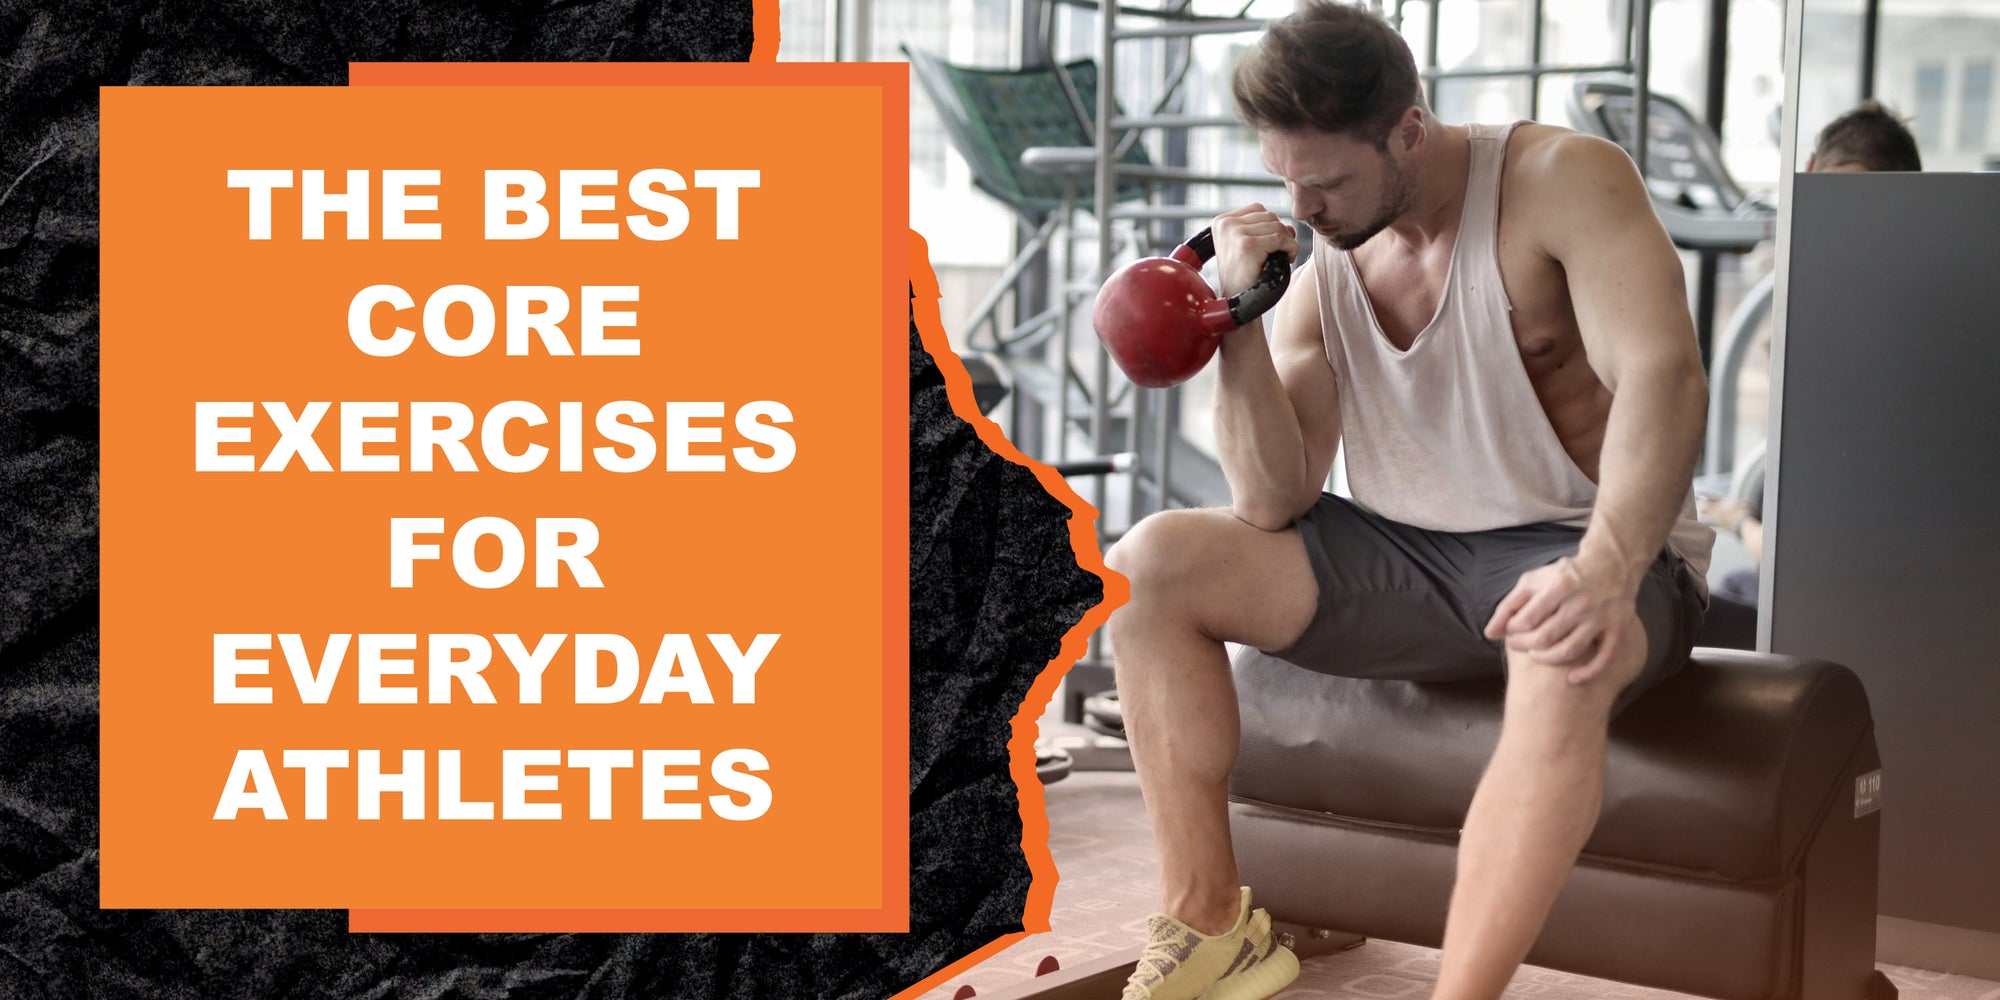 The Best Core Exercises for Everyday Athletes